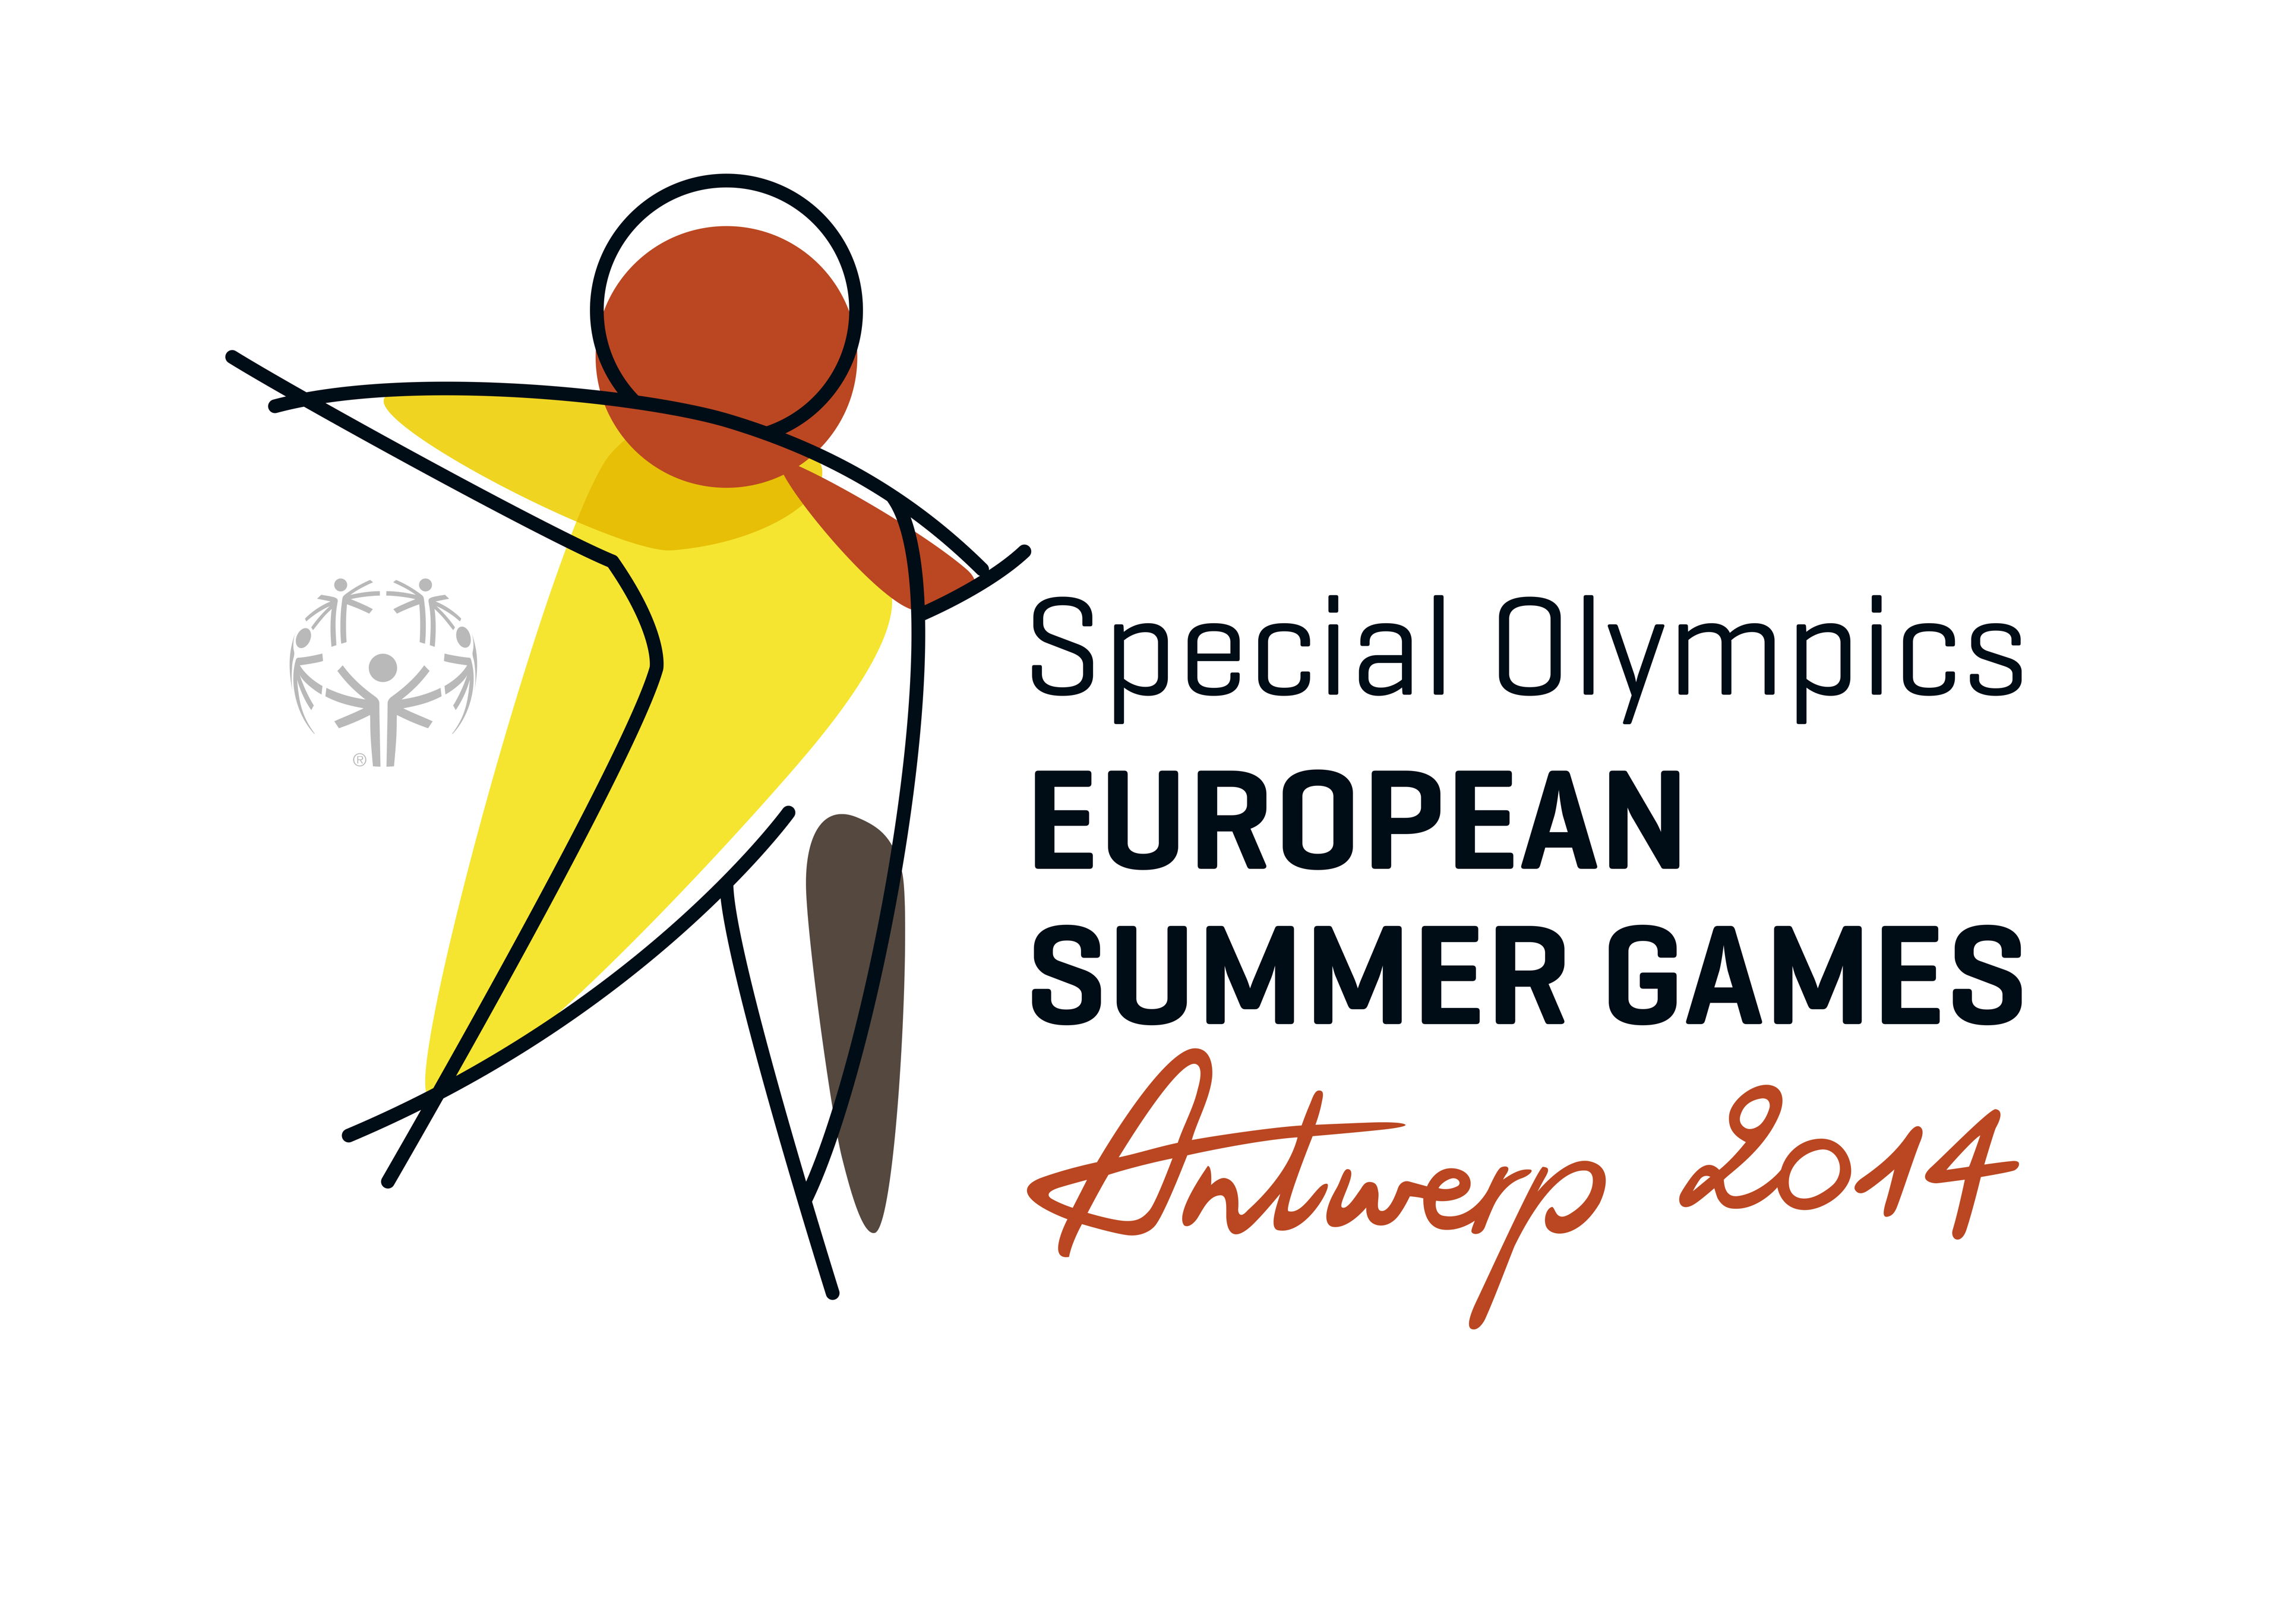 PRESS RELEASE: KEVIN DE BRUYNE CALLS FOR SPECIAL OLYMPICS ATHLETES TO BE HONOURED AT GALA SPORTS AWARDS